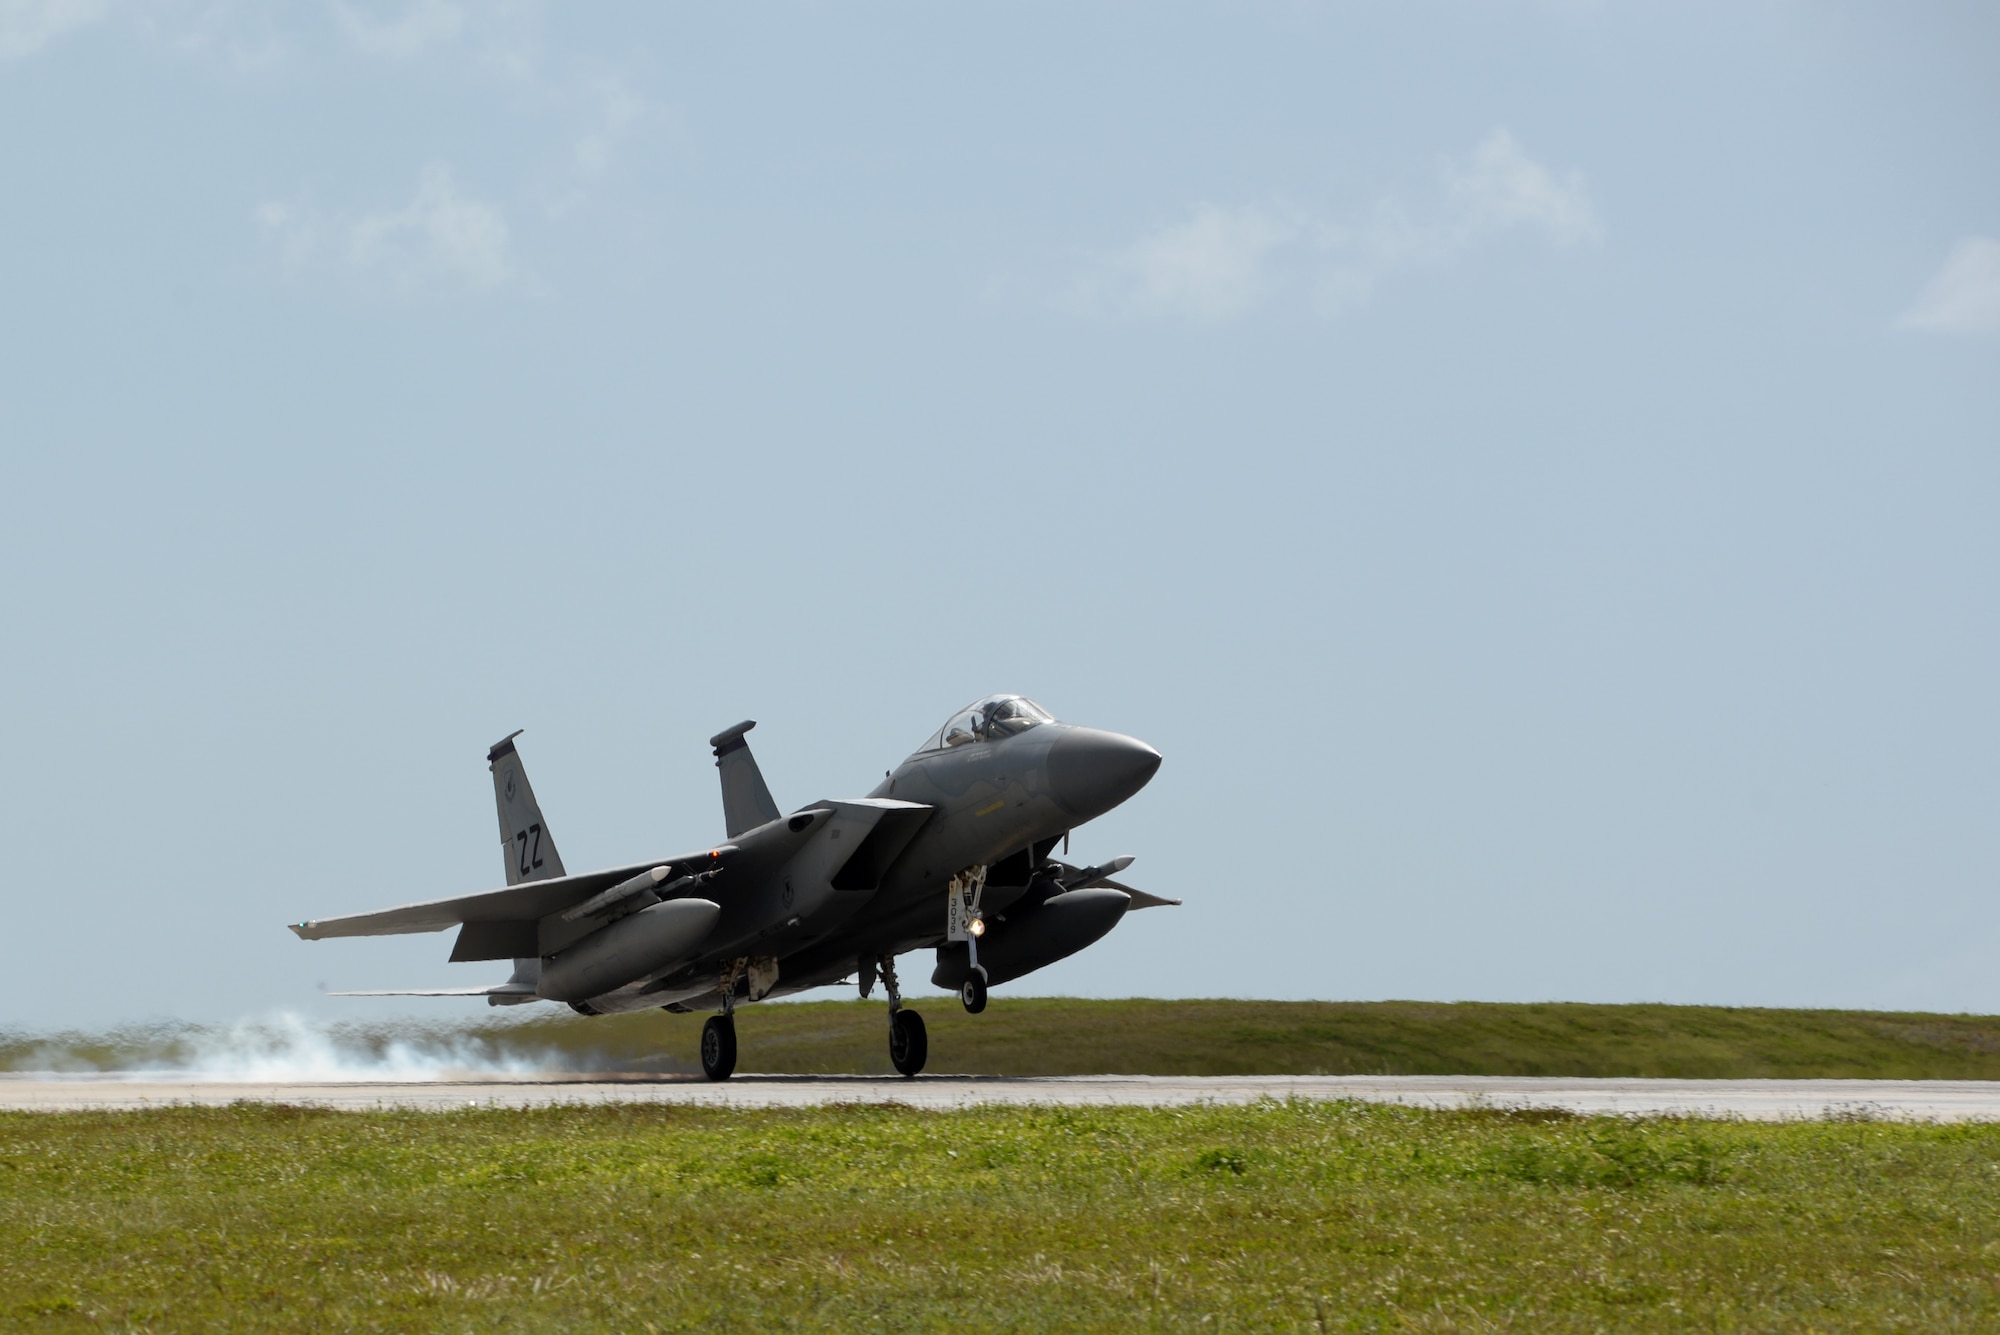 A U.S. Air Force F-15 Eagle, assigned to Kadena Air Base, Japan, lands at Andersen Air Force Base, Guam on April 20, 2017. Fighters from Kadena AB deployed alongside Republic of Singapore Air Force fighters to conduct bilateral training in the Pacific during Exercise Vigilant Ace. (U.S. Air Force/Airman 1st Class Gerald R. Willis)